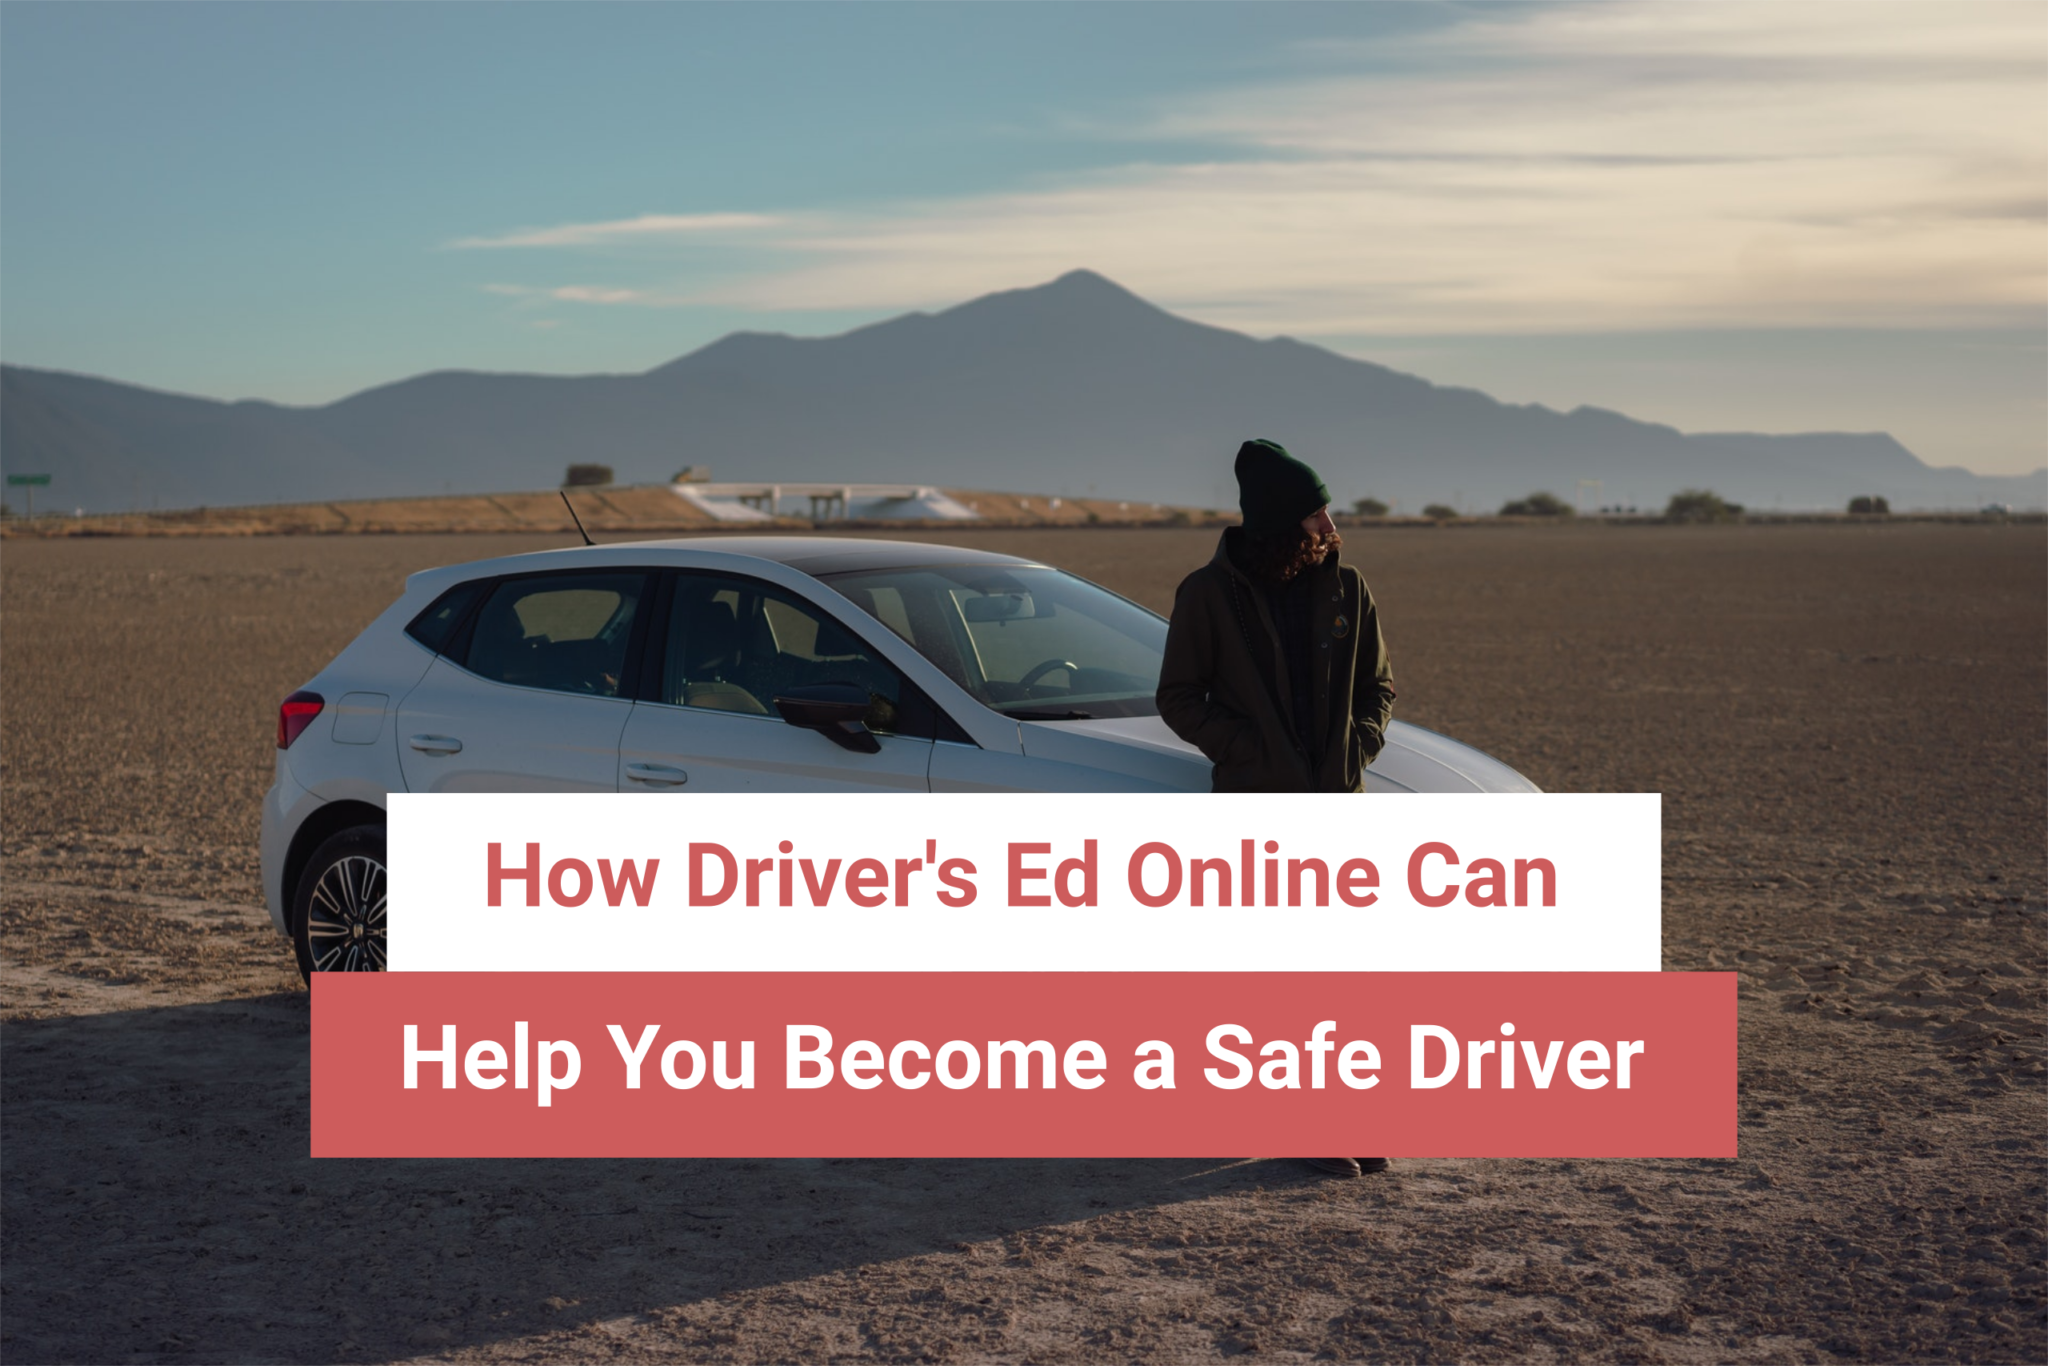 How Driver’s Ed Online Can Help You Become a Safe Driver